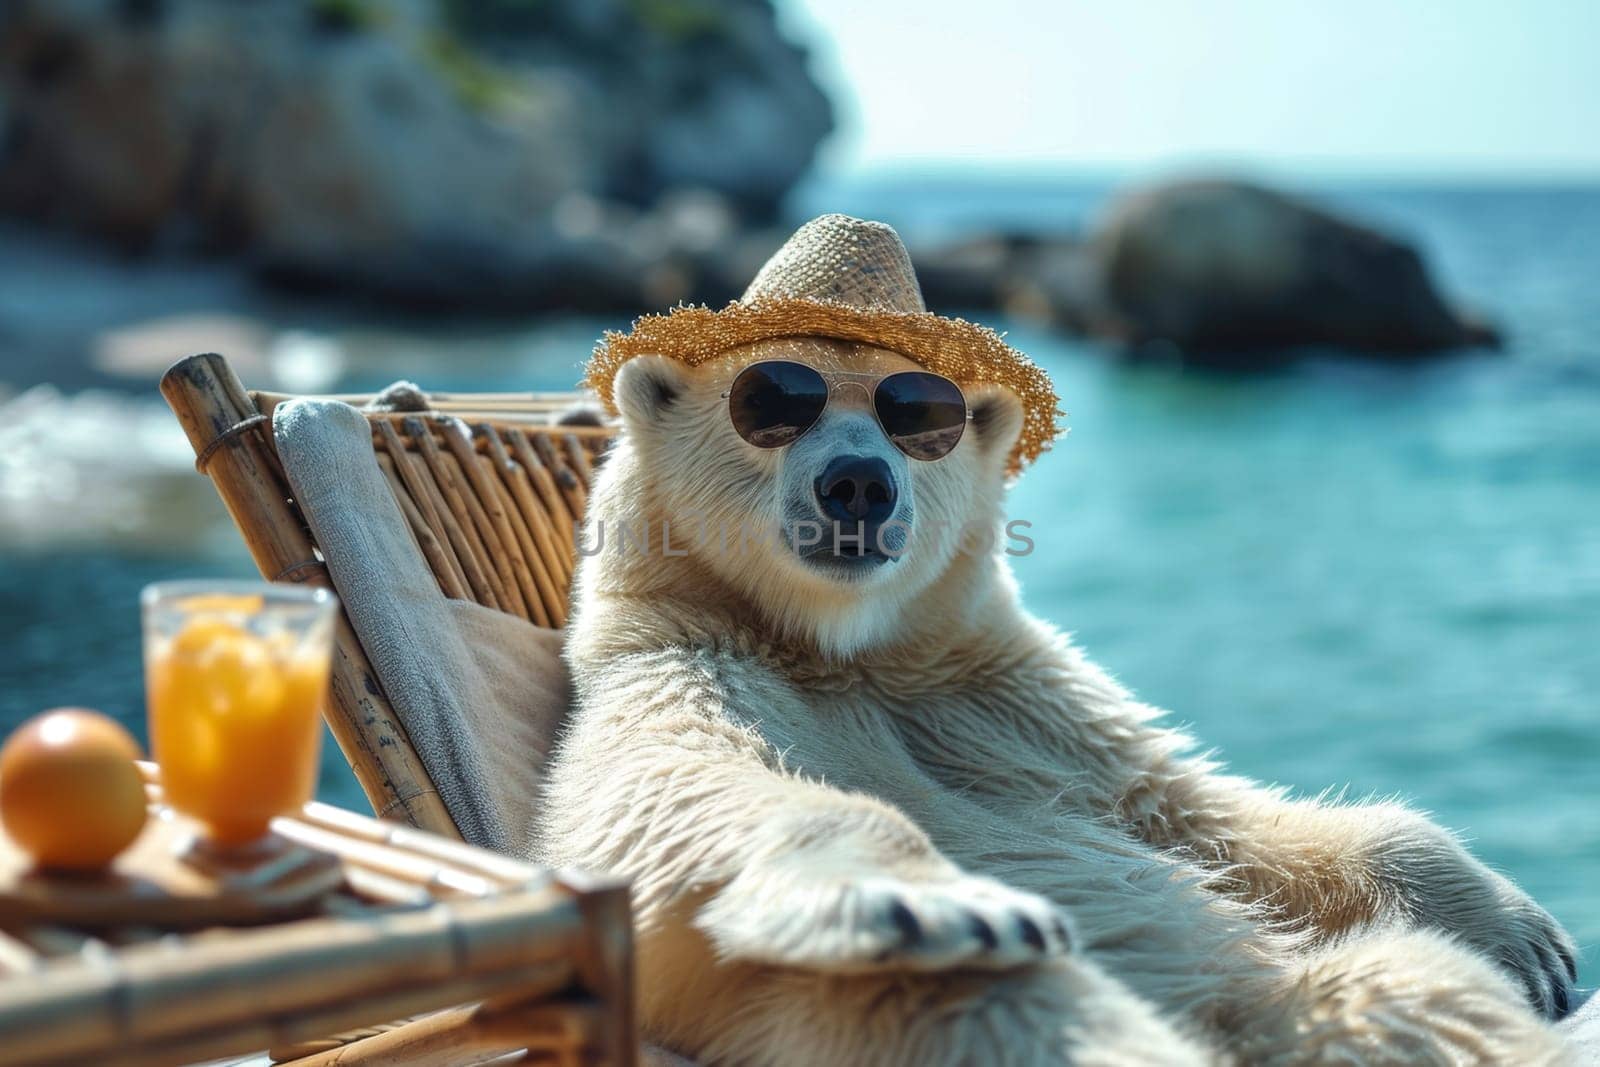 A polar bear in a hat and glasses is relaxing on the beach in a chaise longue drinking orange juice. 3d illustration by Lobachad